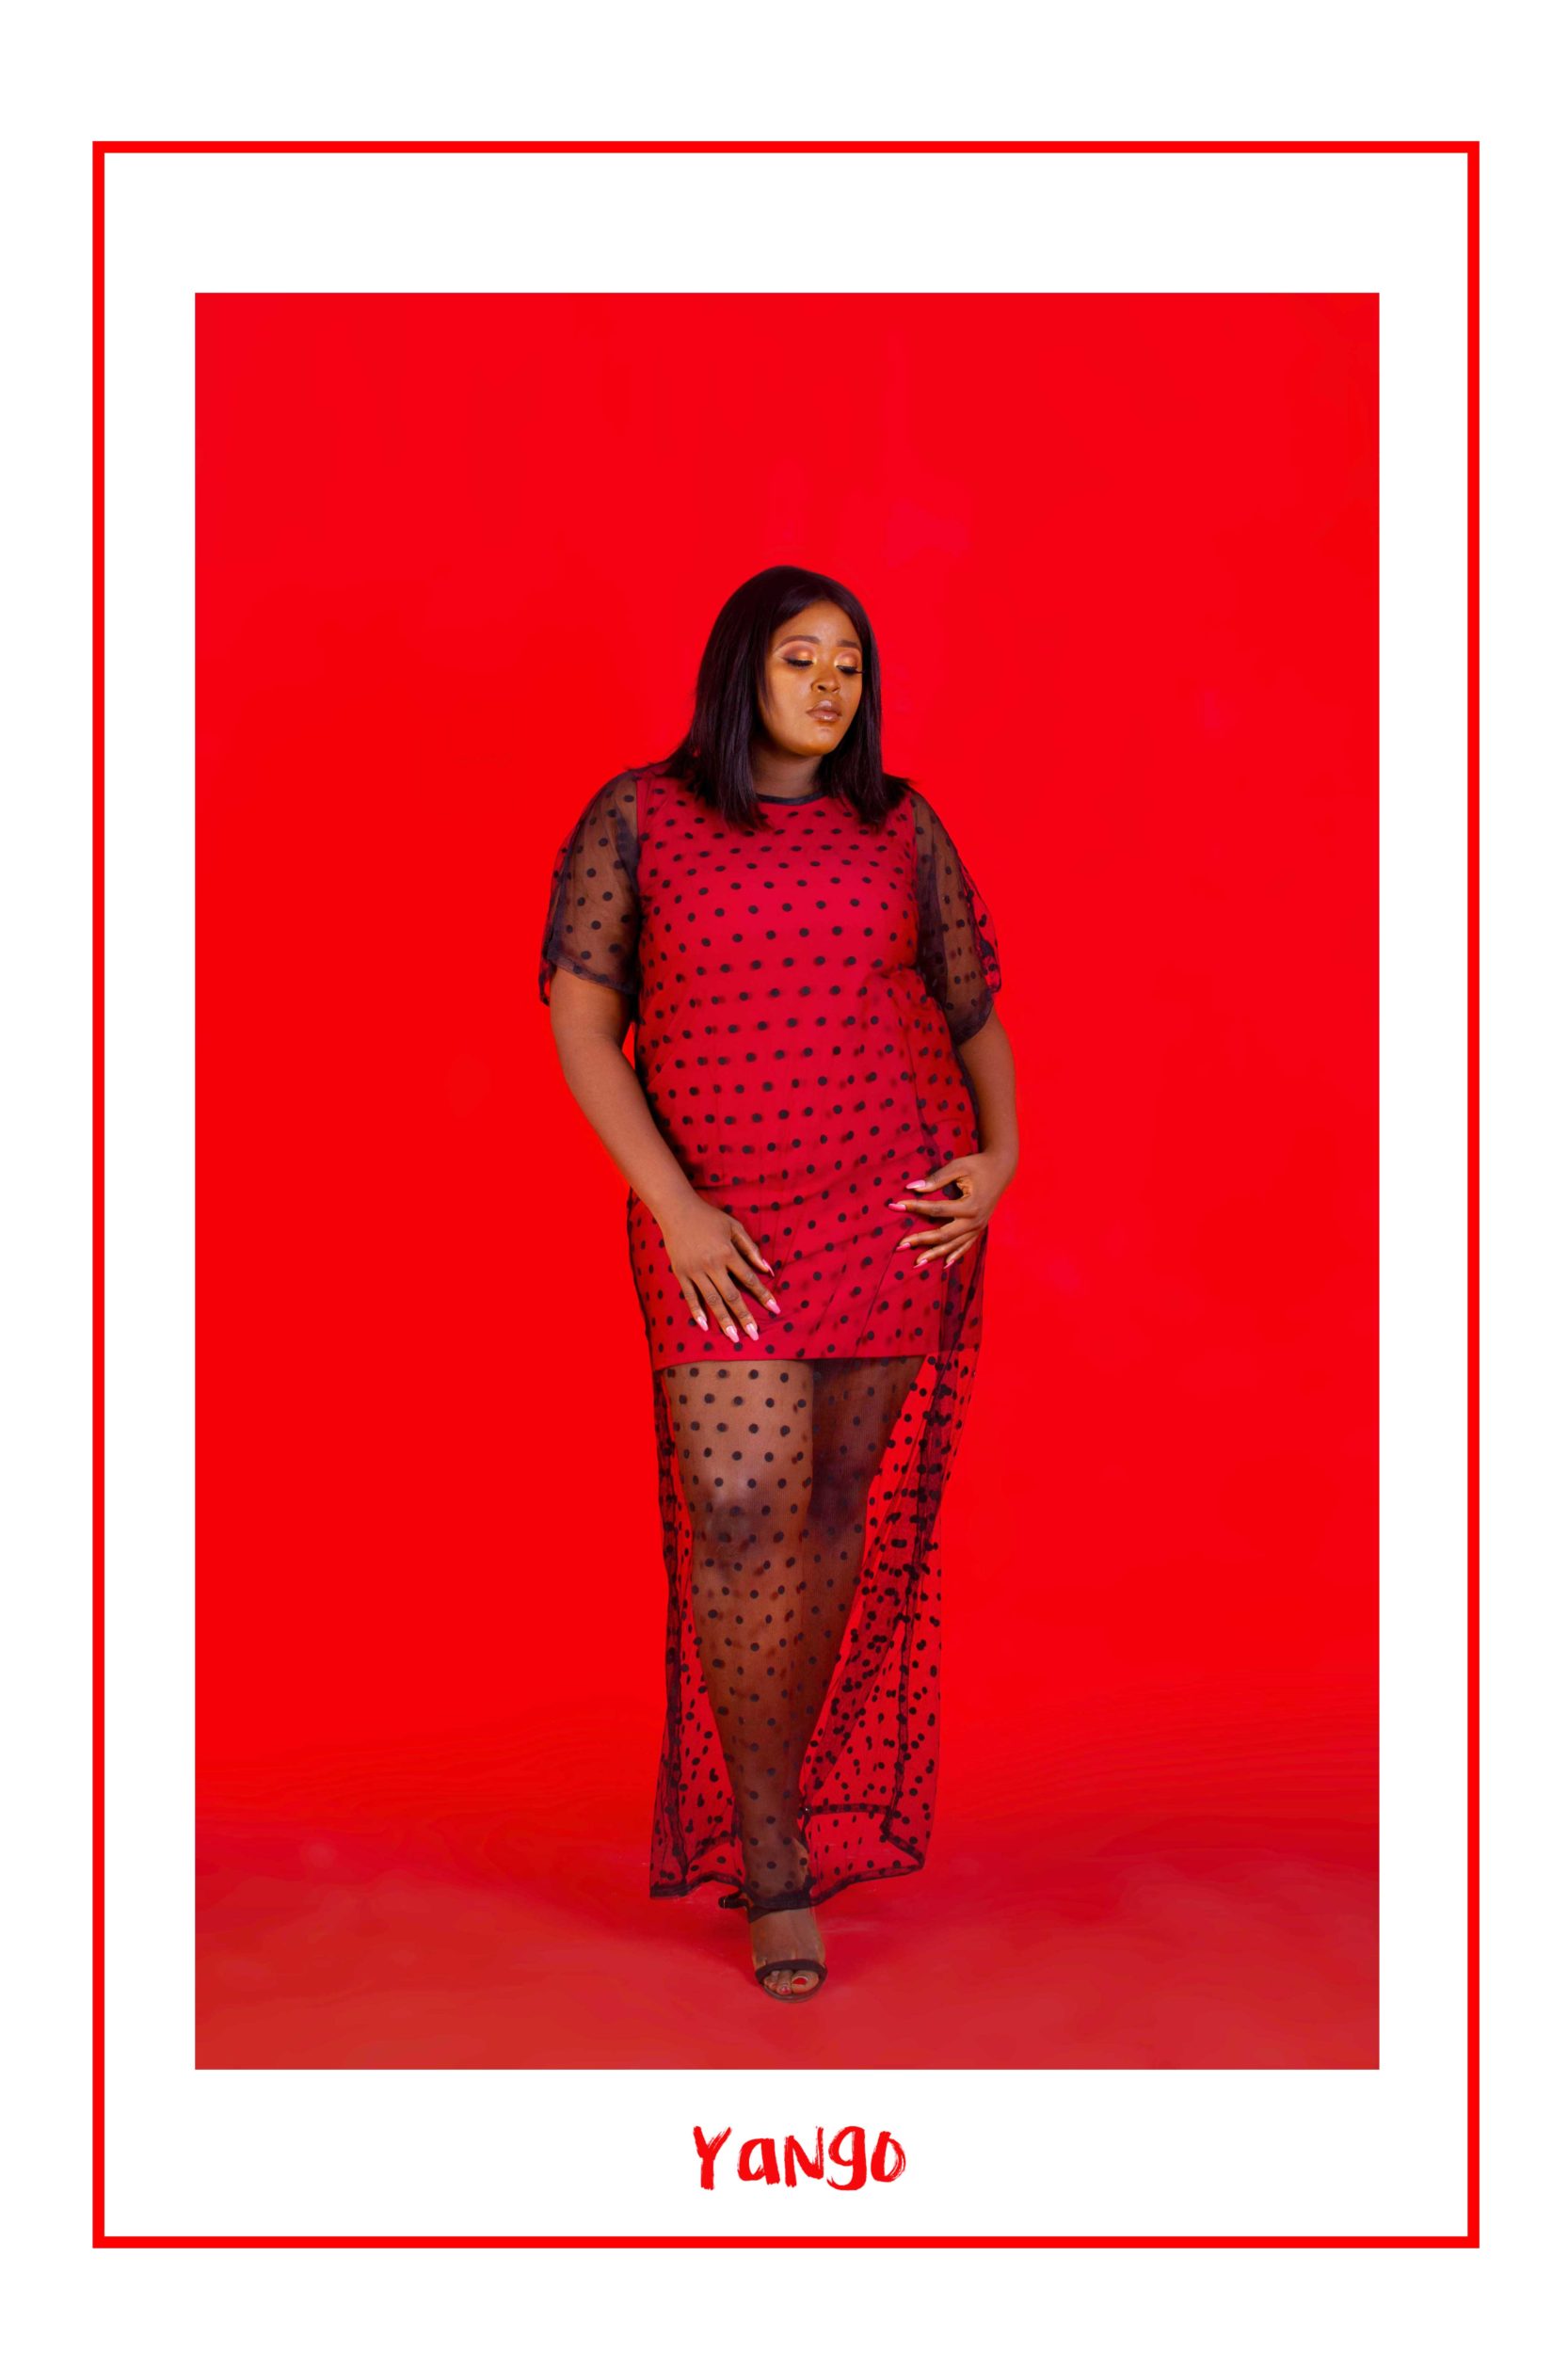 Yangomangoo just Released a Valentine’s Collection for Plus-Size Women